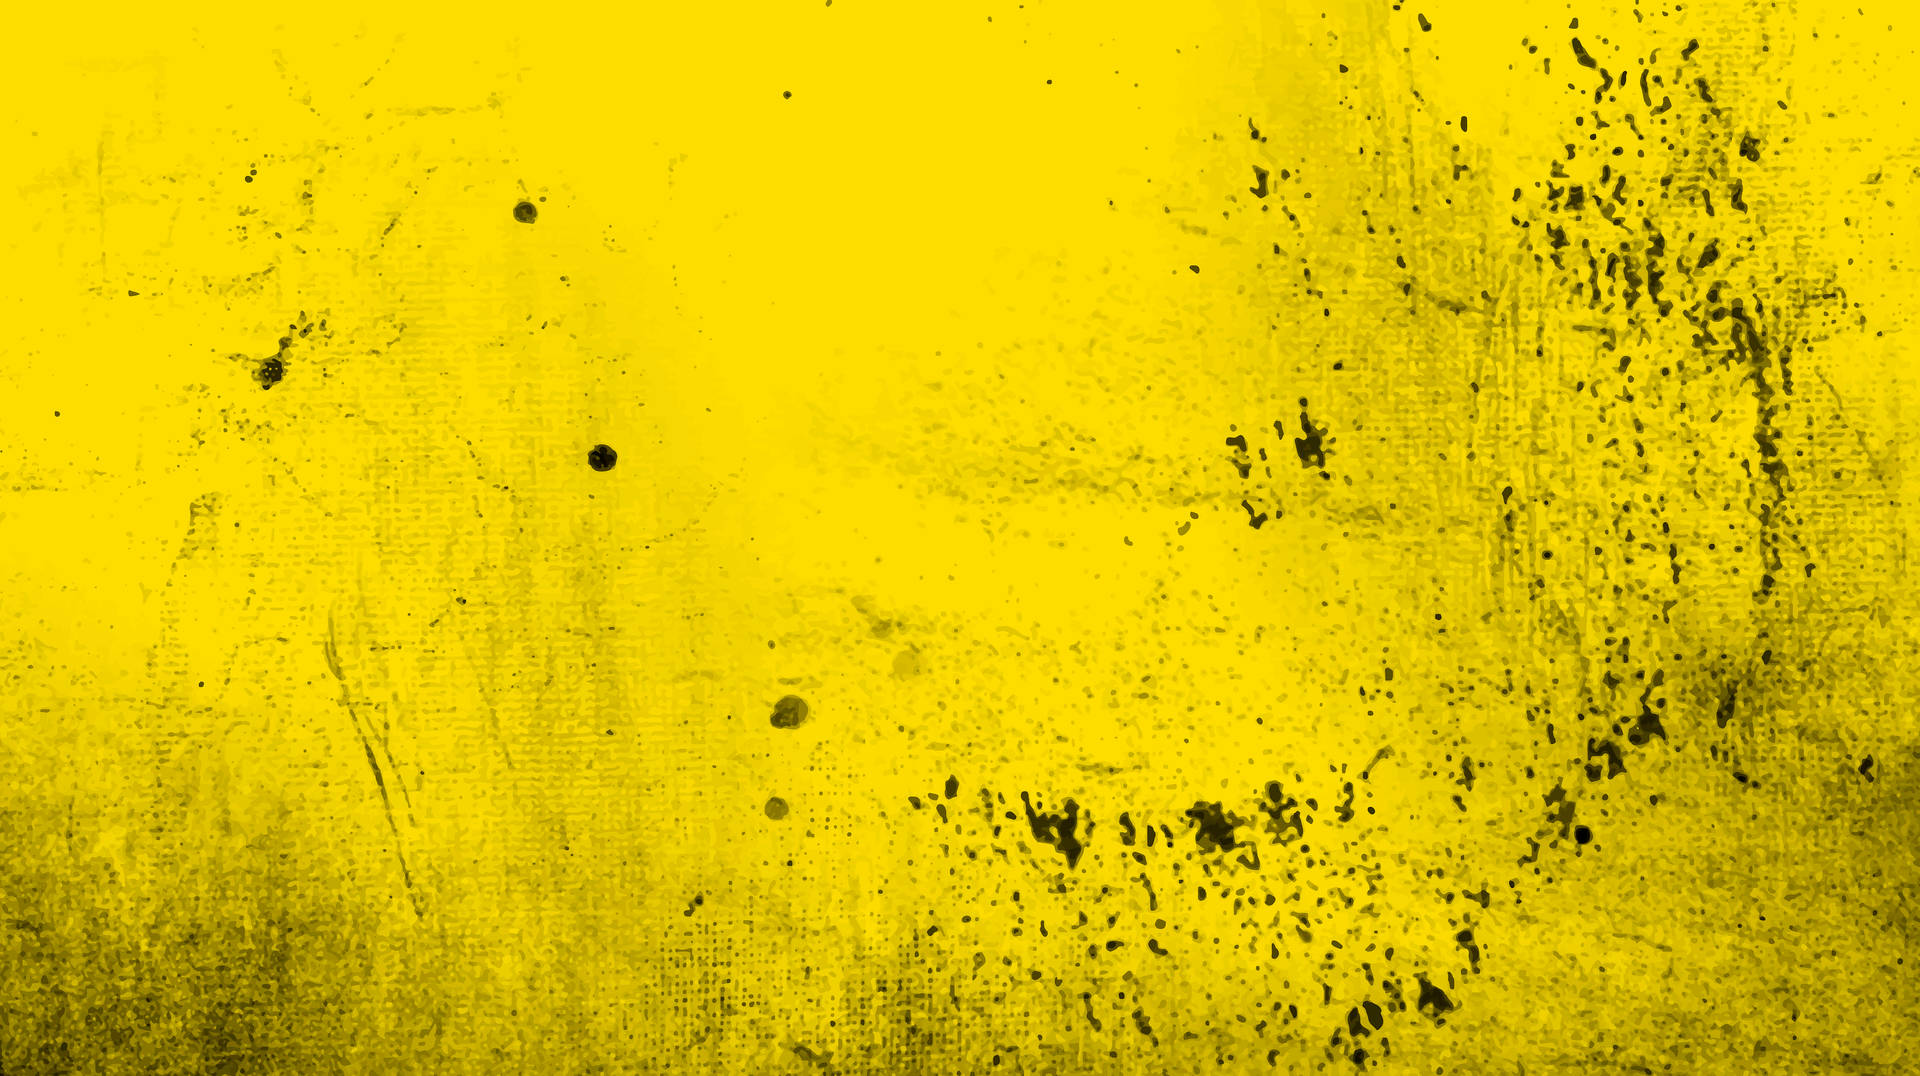 Solid Yellow Grunge Texture Wallpaper